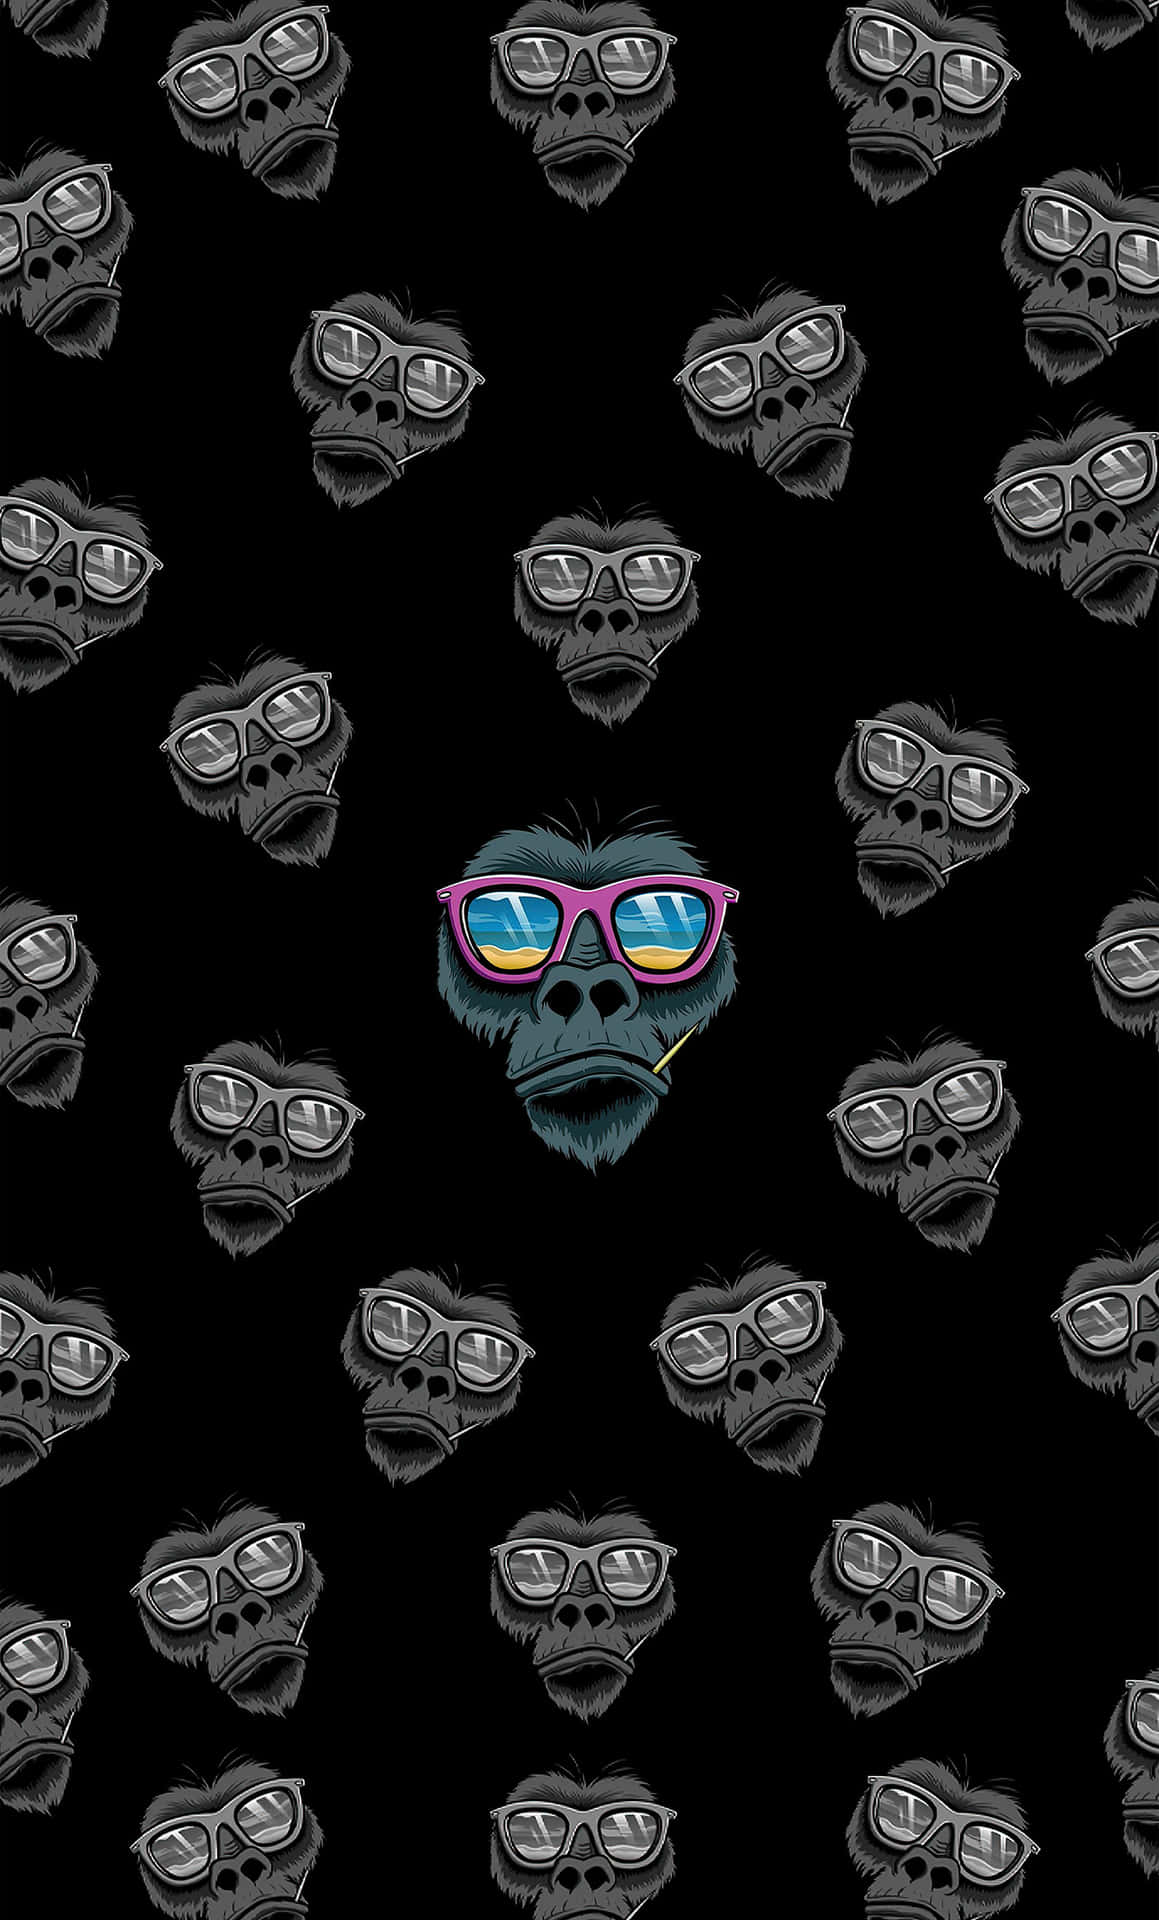 A Black Background With A Black Gorilla With Glasses Wallpaper